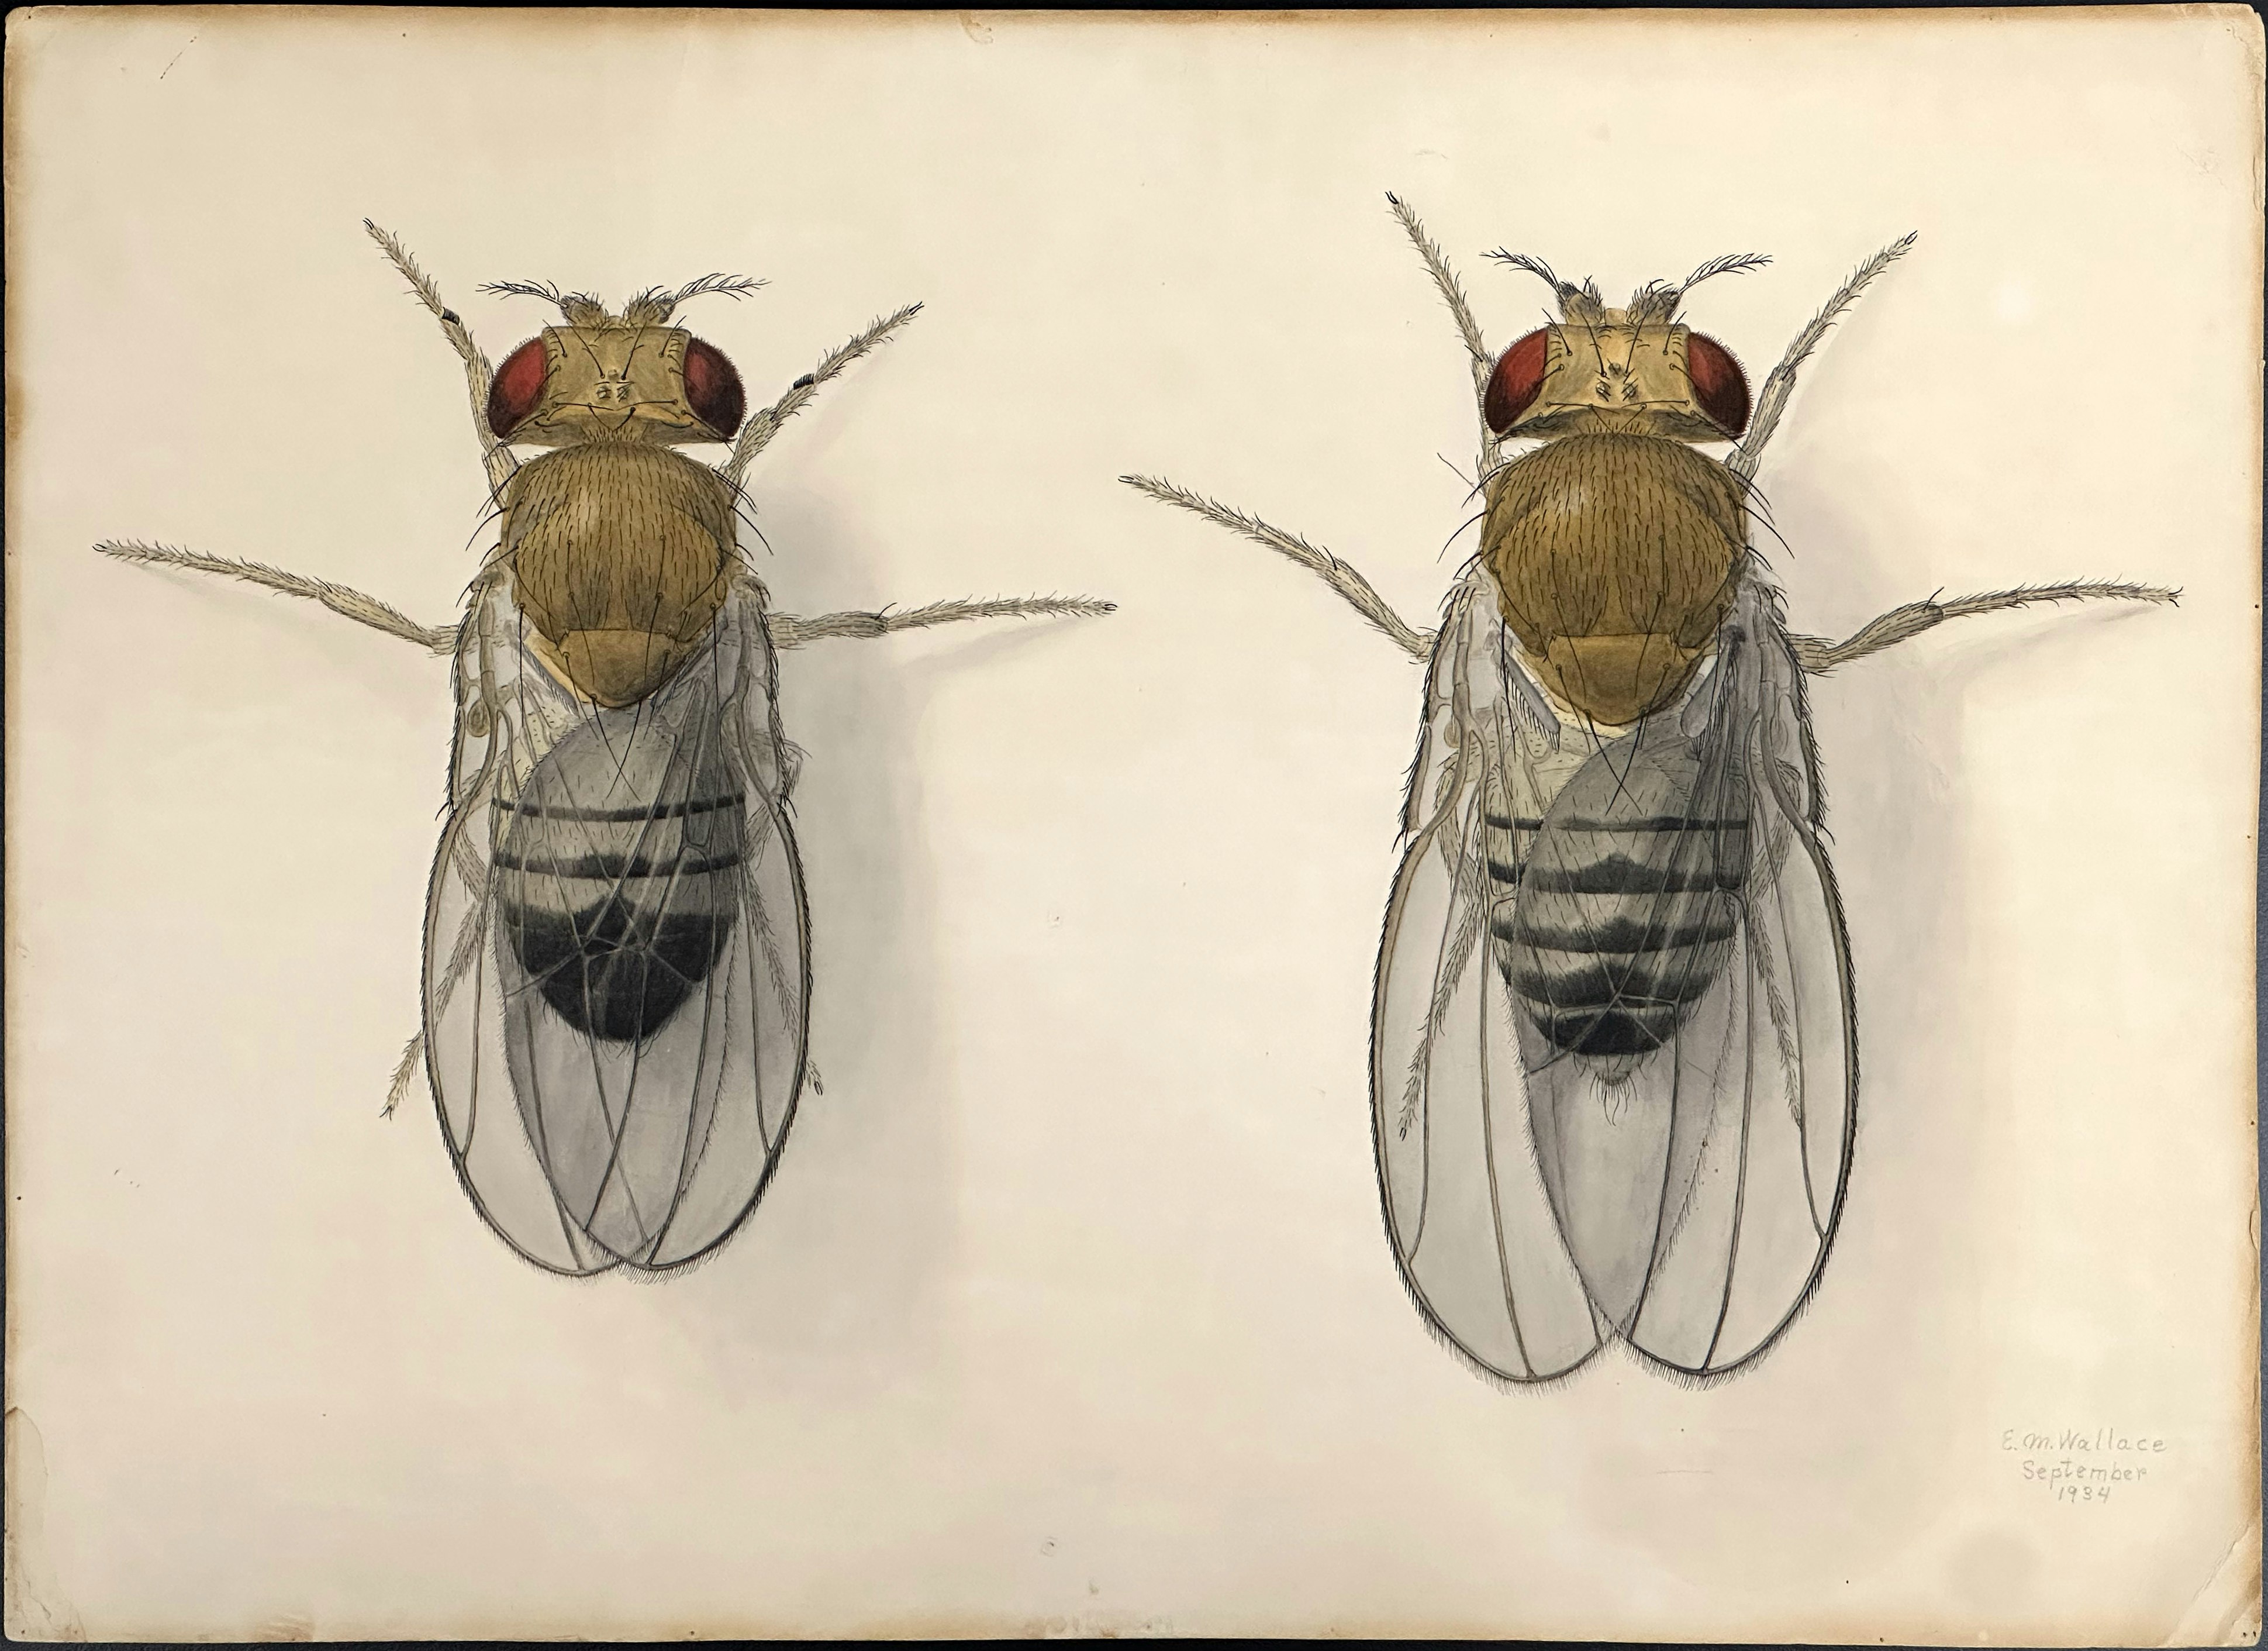 Drosophila, 1934, Edith M. Wallace. Ink and watercolor on paper. ©California Institute of Technology.